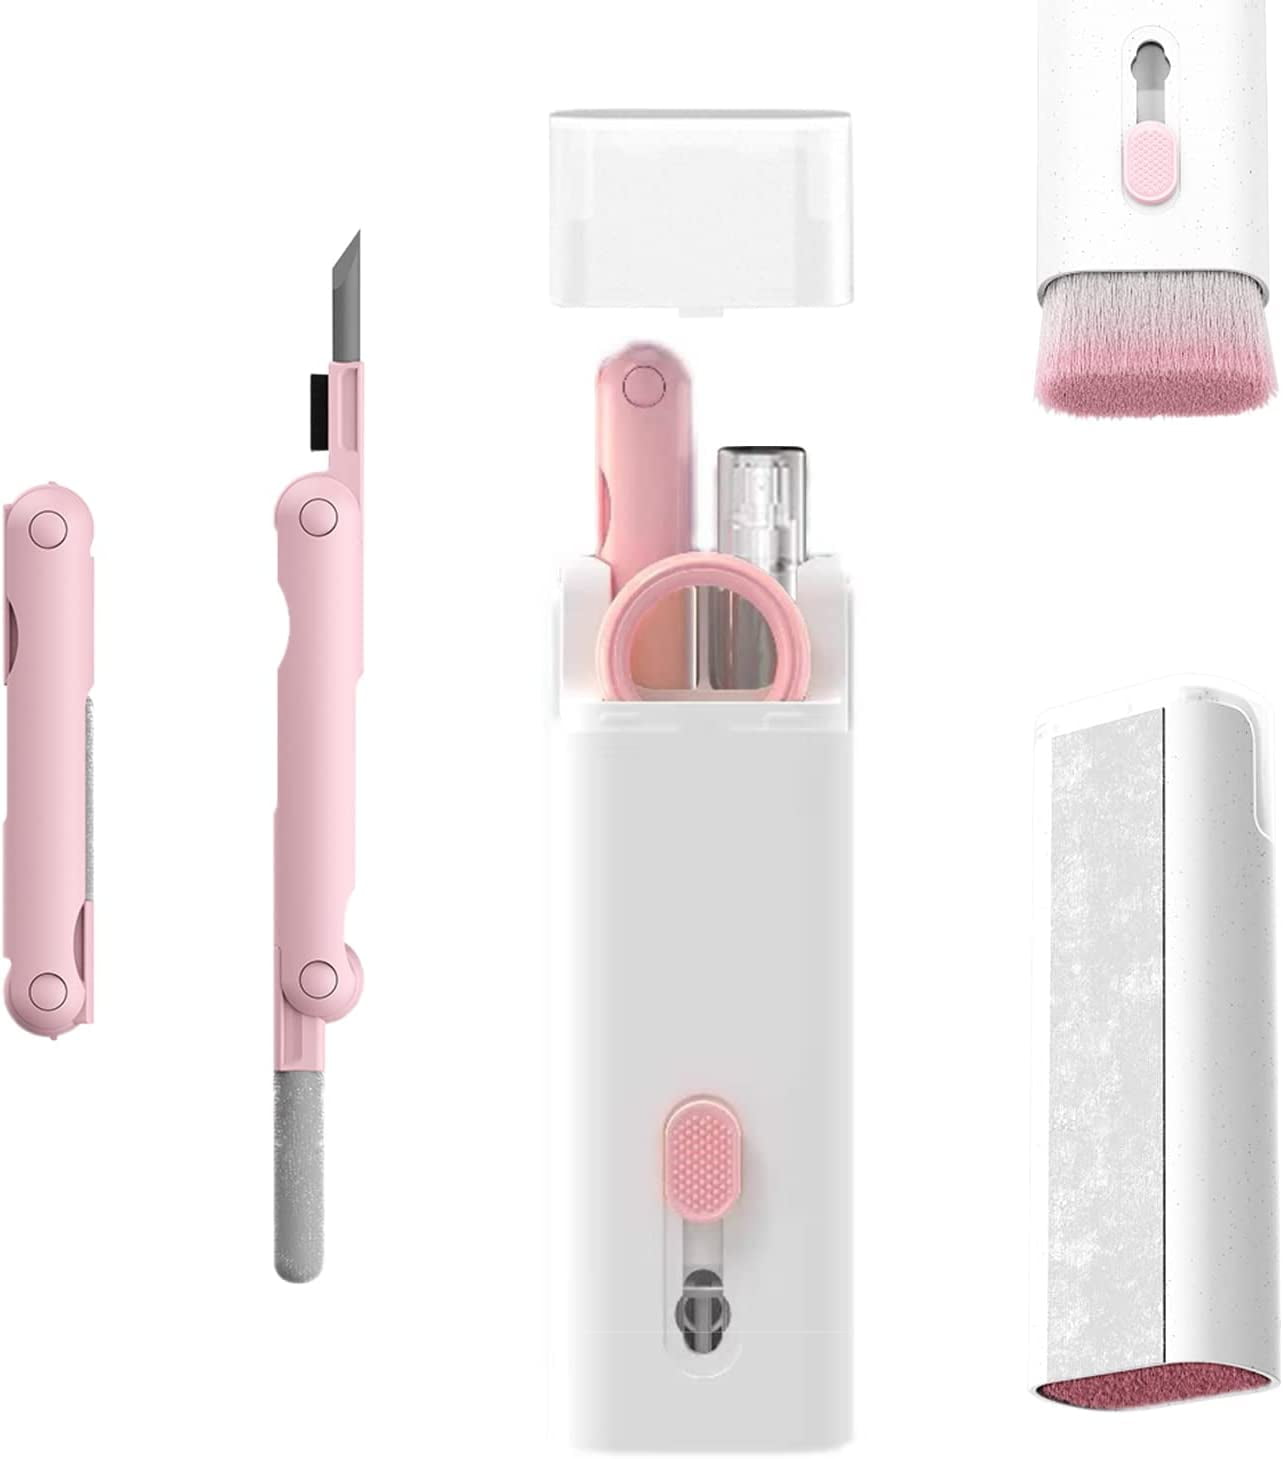 Cleaner Kit for Airpods Pro 1 2 3, Smasener Bluetooth Airpod Pro Earbuds  Cleaning Cleaner Kit Pen, 3 in 1 Compact Portable Multifunctional Cleaning  Kit 